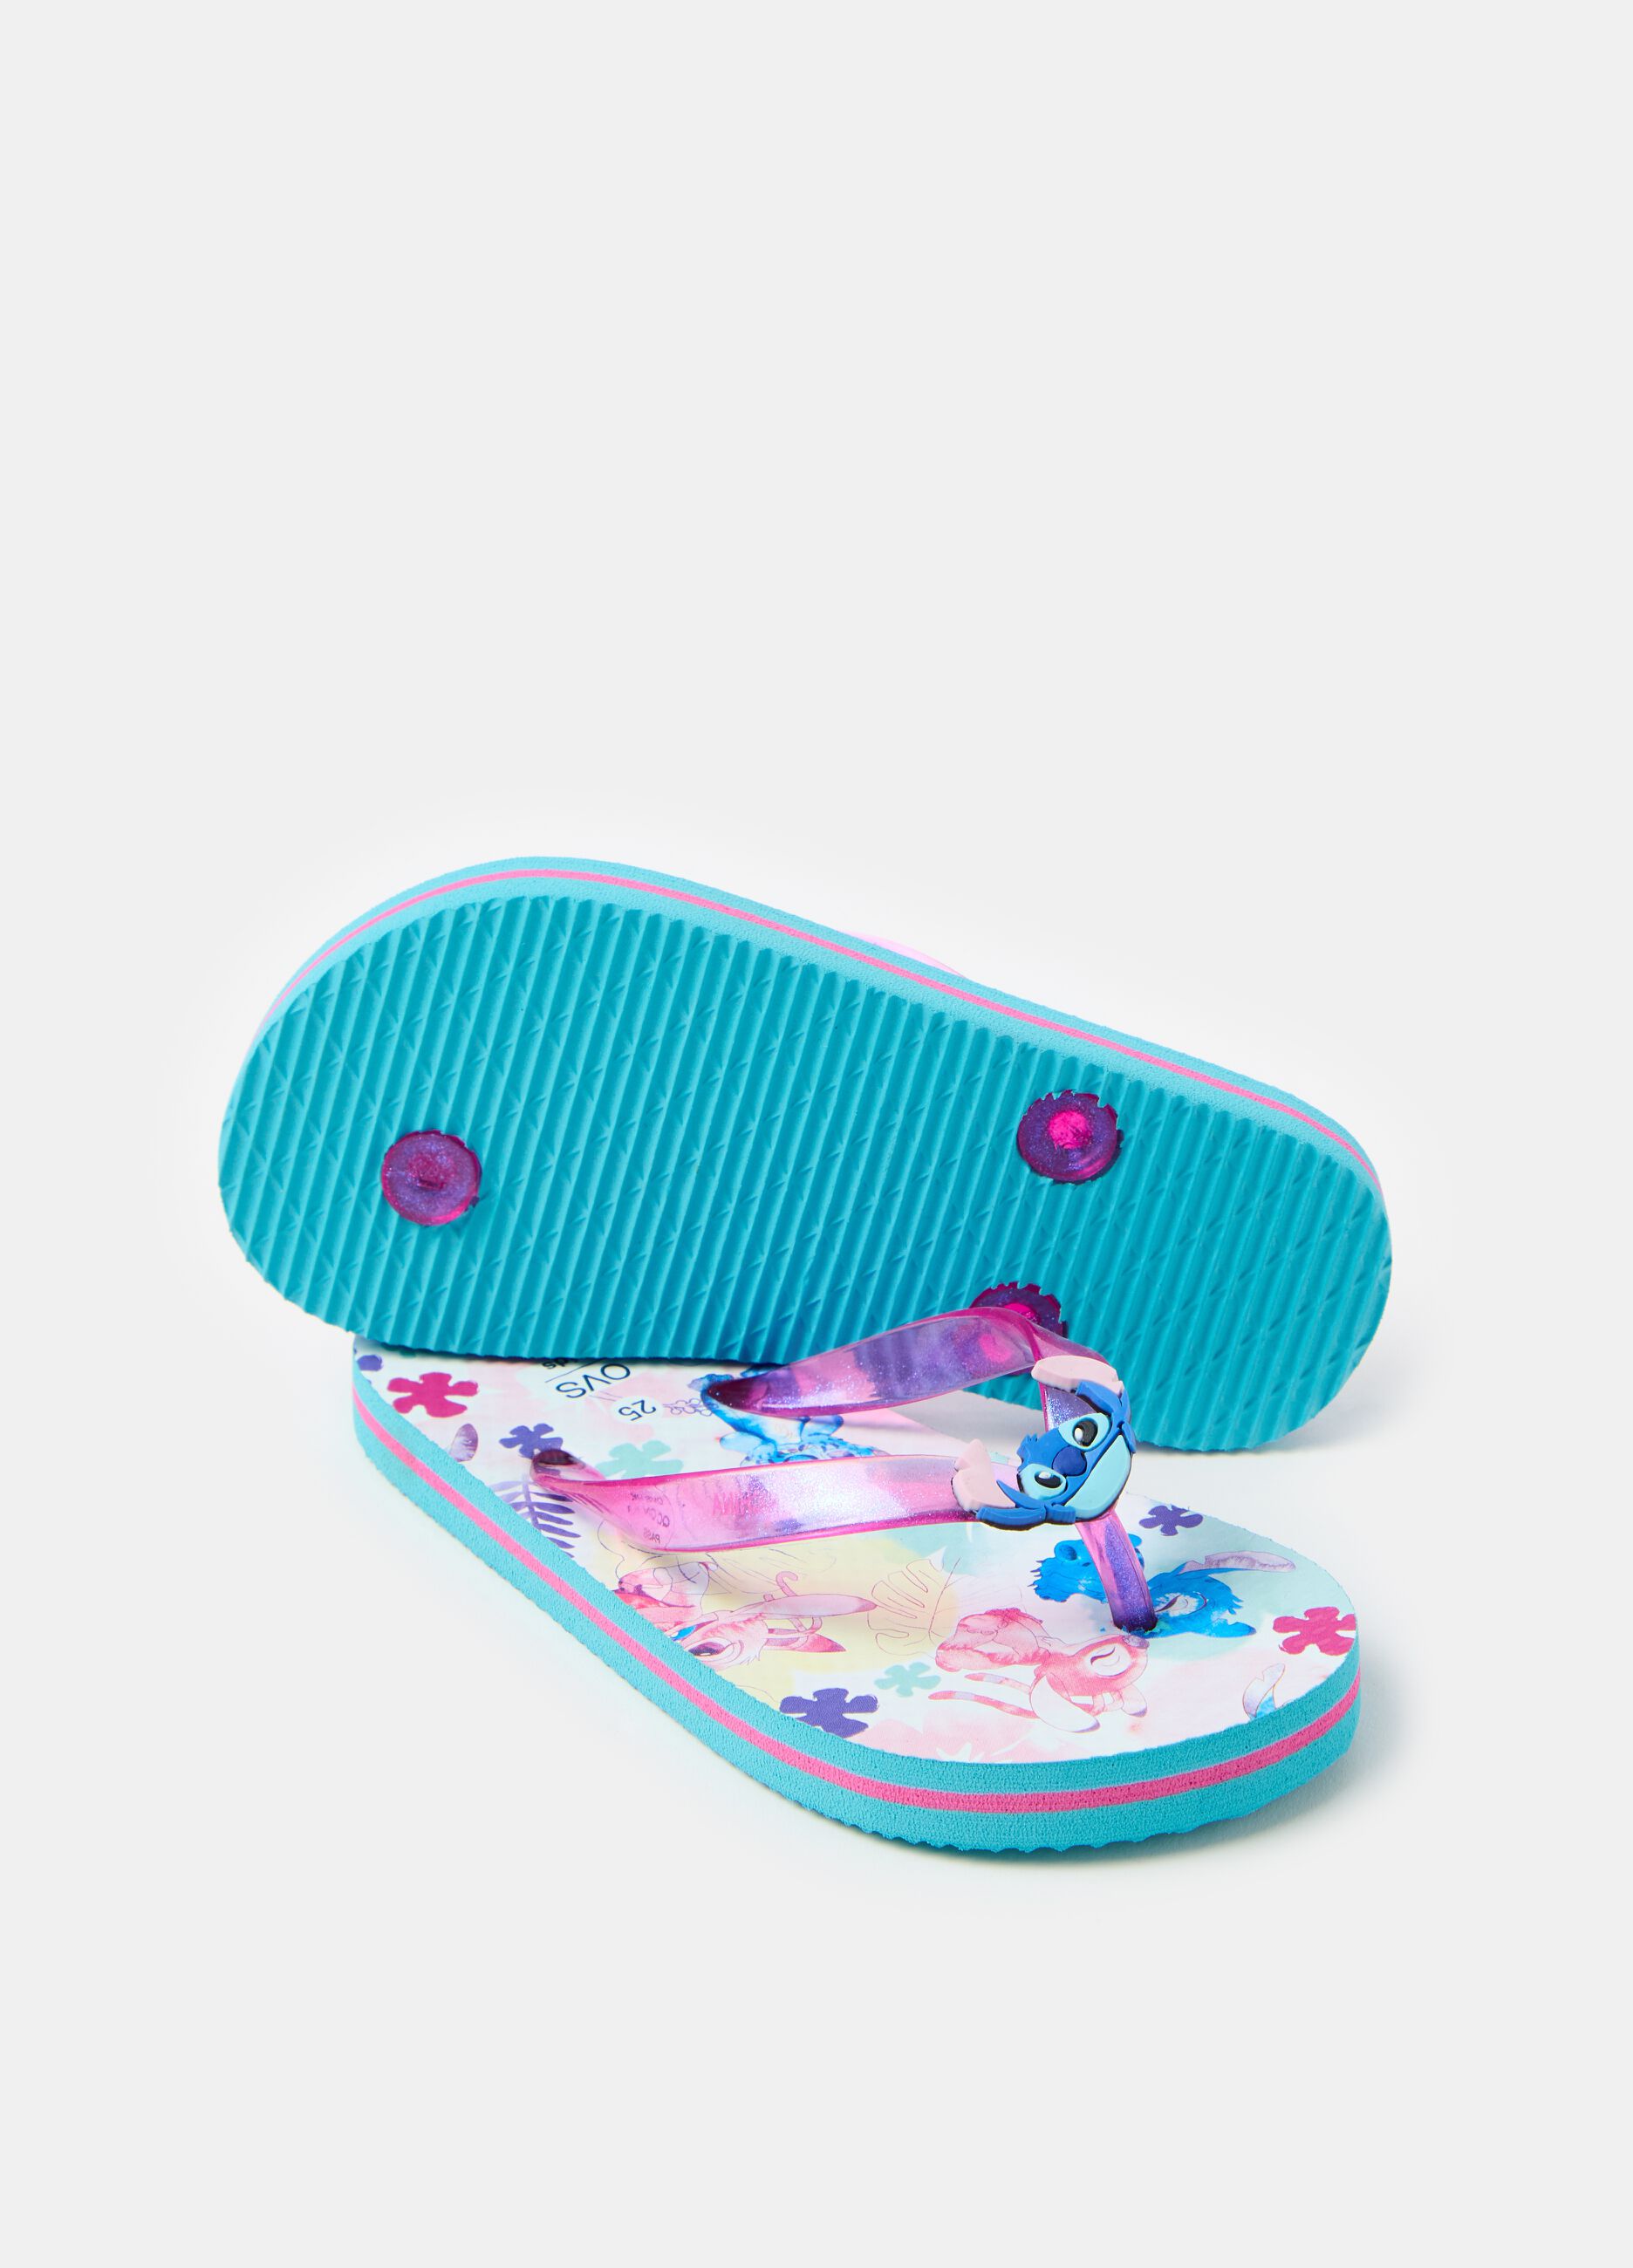 Thong sandals with Stitch print